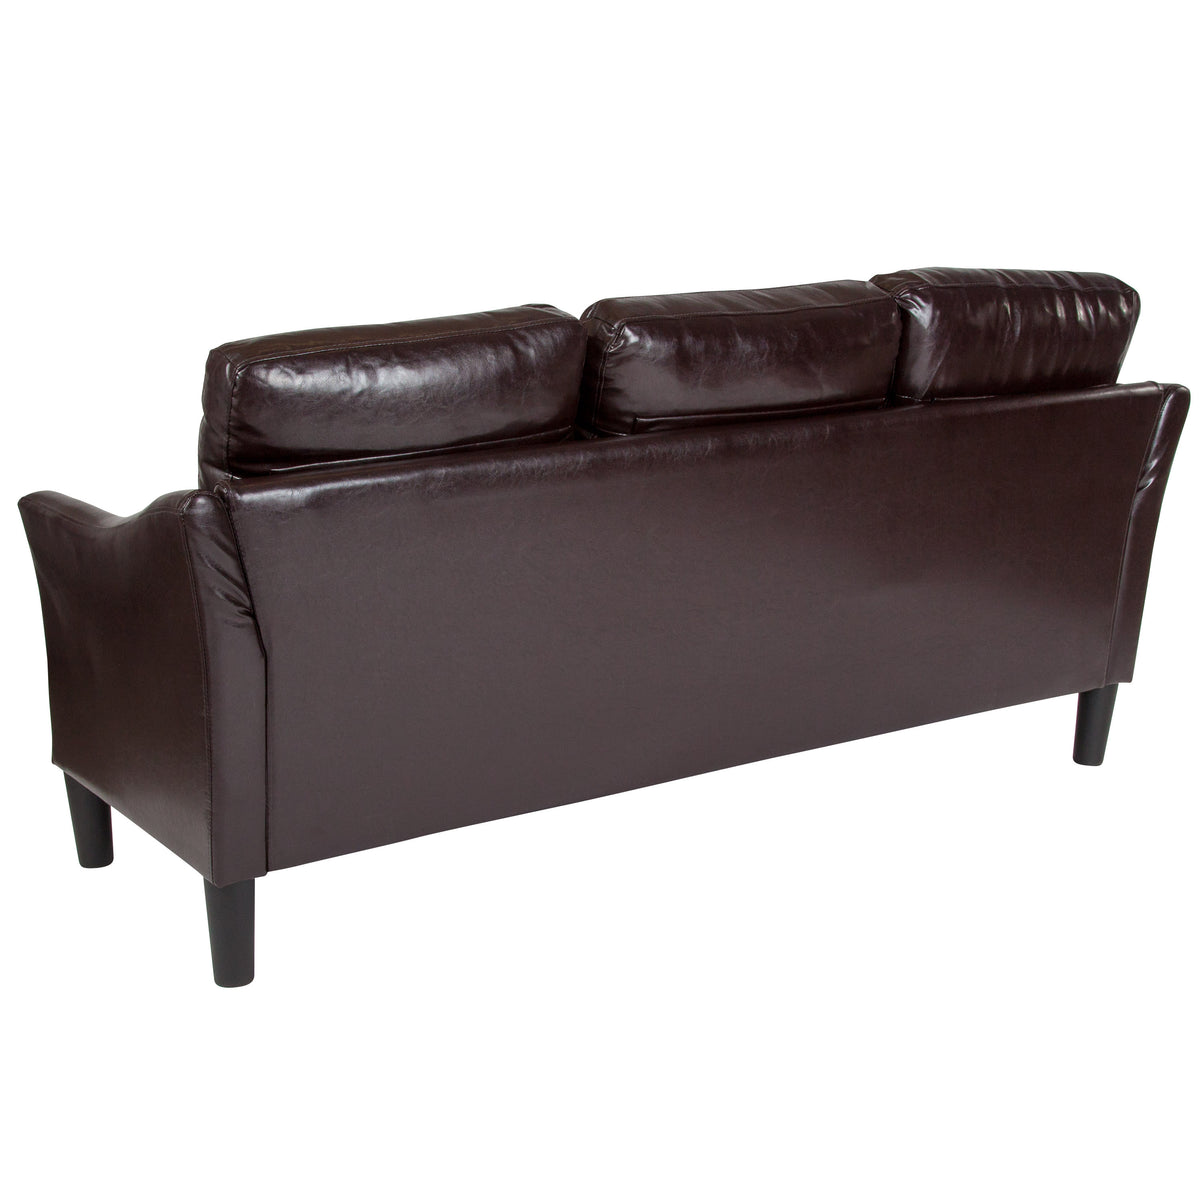 Brown LeatherSoft |#| Upholstered Living Room Sofa with Single Cushion Seat in Brown LeatherSoft